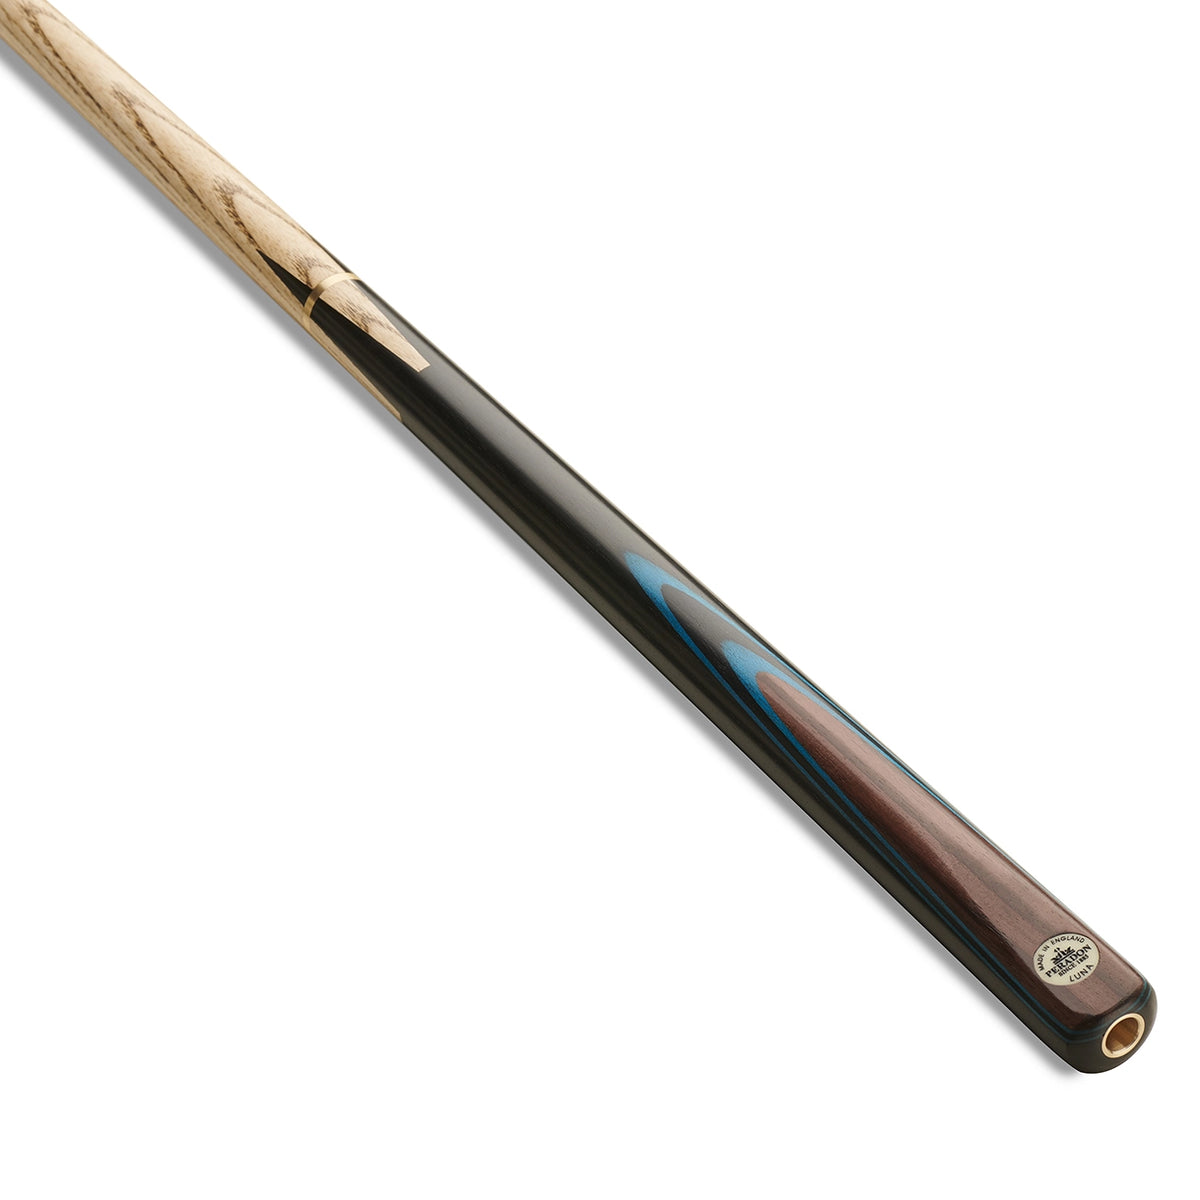 Peradon Luna 3/4 Jointed 8 Ball Pool Cue. On angle view